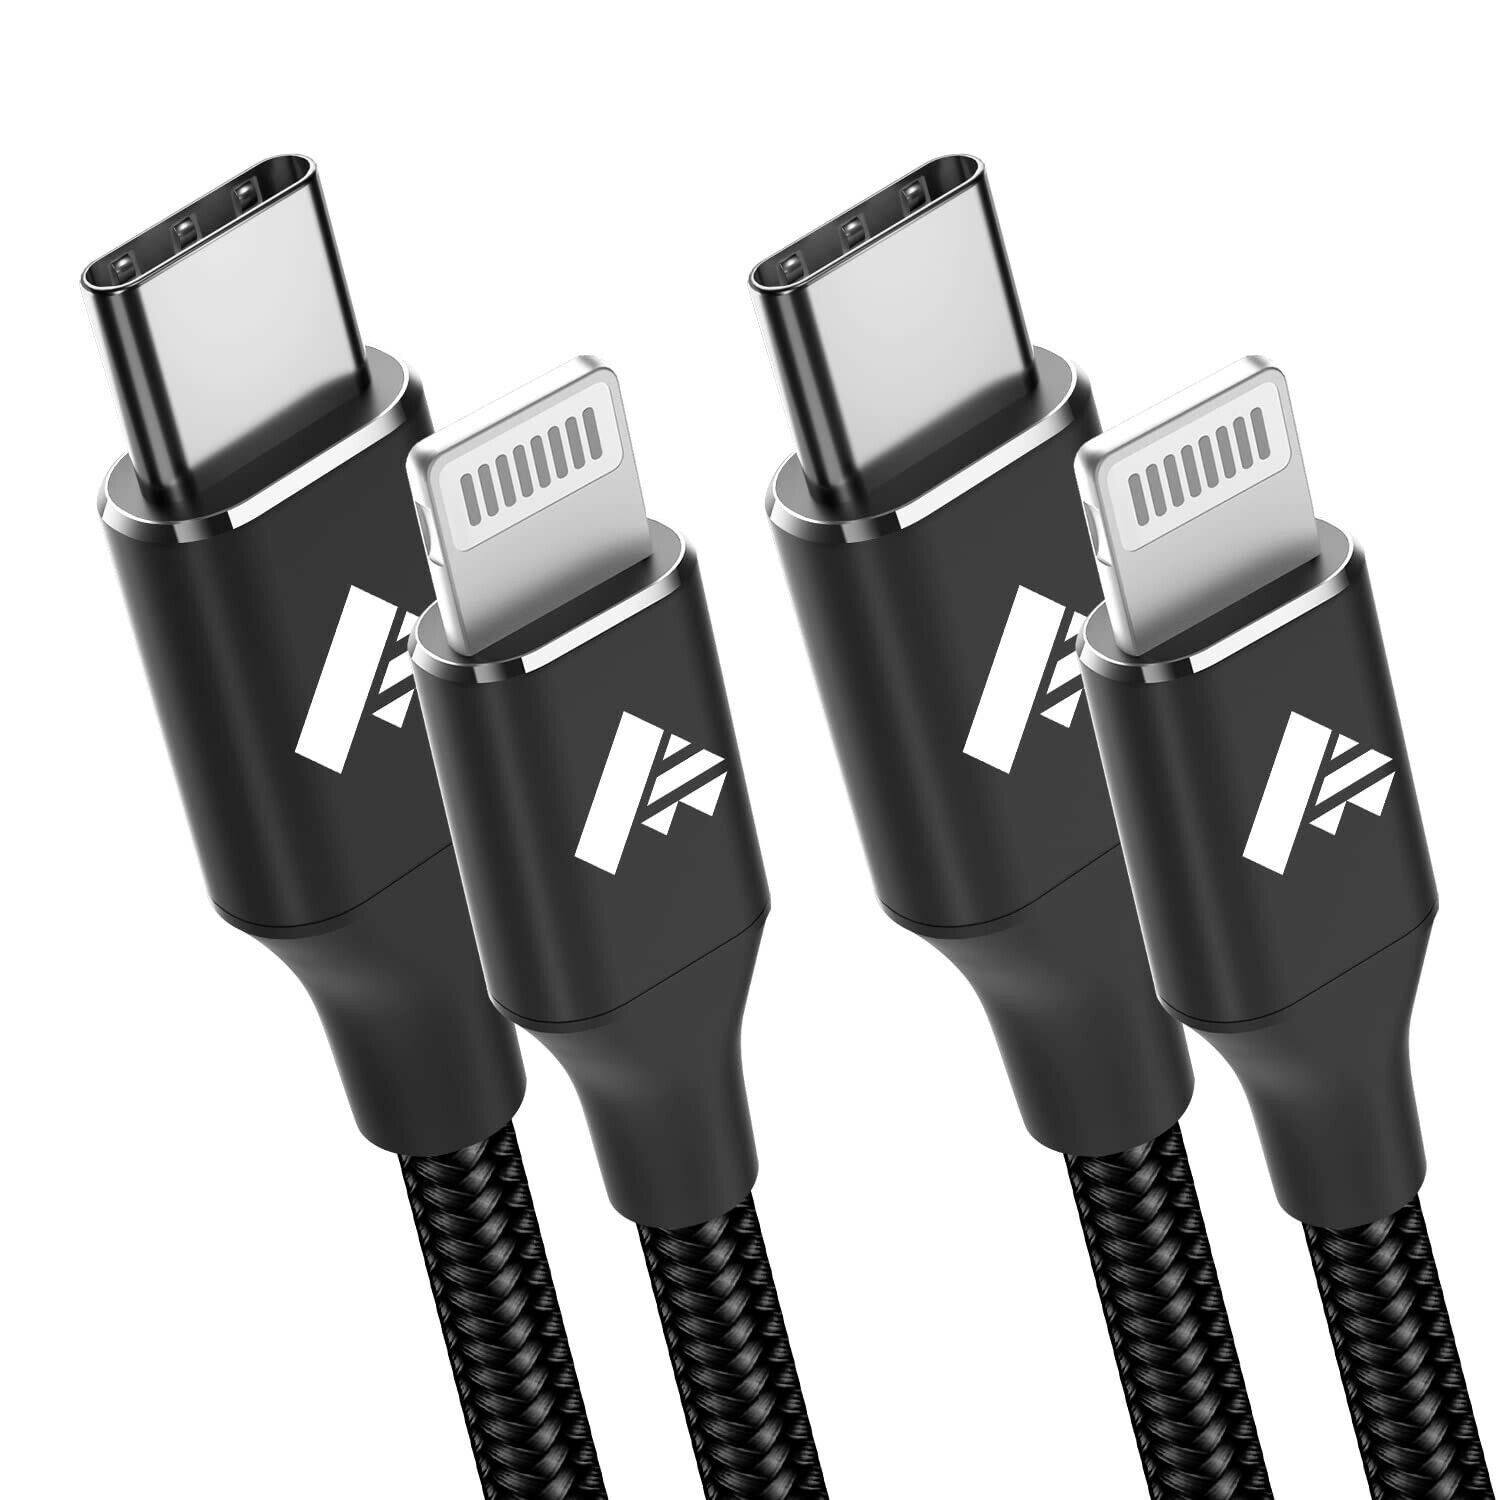 USB C to Lightning Cable 2M 2Pack, Aioneus Fast iPhone Charger MFi Certified Lon